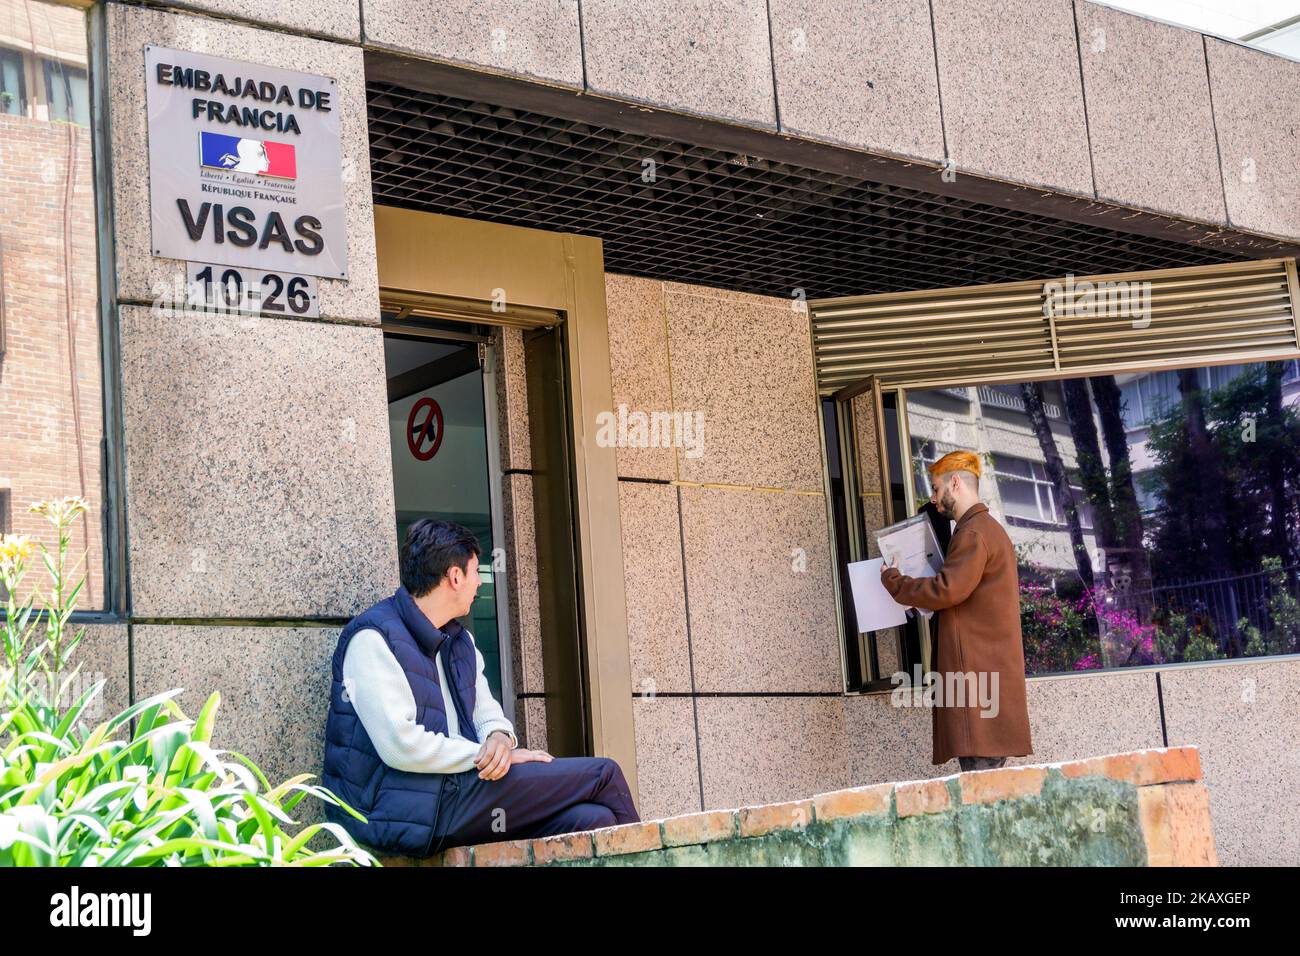 Bogota Colombia,El Chico Calle 93,man men male,French France Embassy Visa Visas request requests outside exterior front entrance,Colombian Colombians Stock Photo